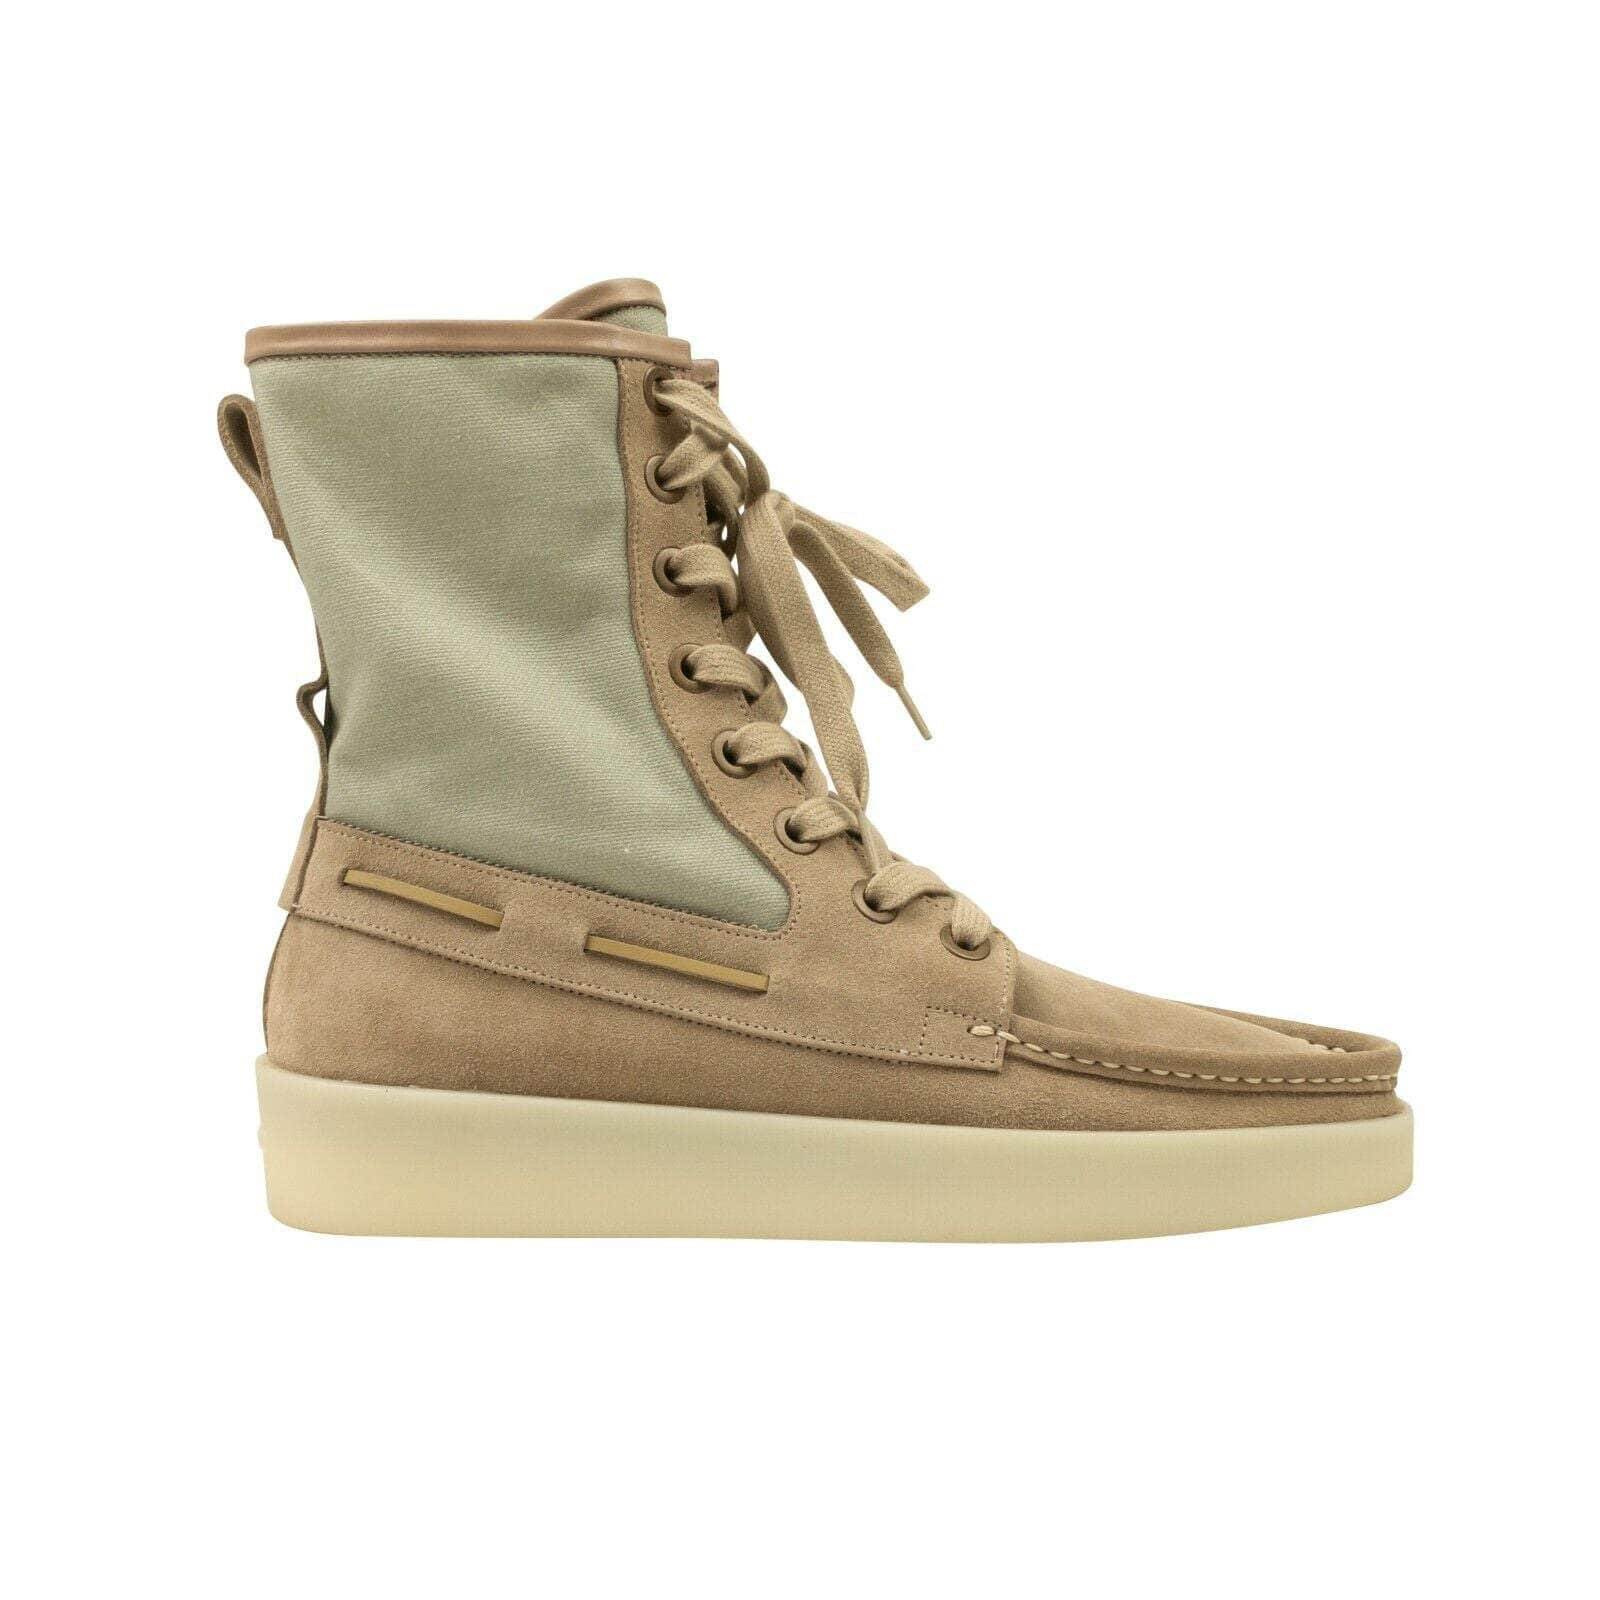 Fear Of God 500-750, couponcollection, fear-of-god, gender-mens, main-shoes, mens-casual-boots, mens-shoes, size-40 40 Beige Suede Hi Daino Boots 95-FOG-2009/40 95-FOG-2009/40